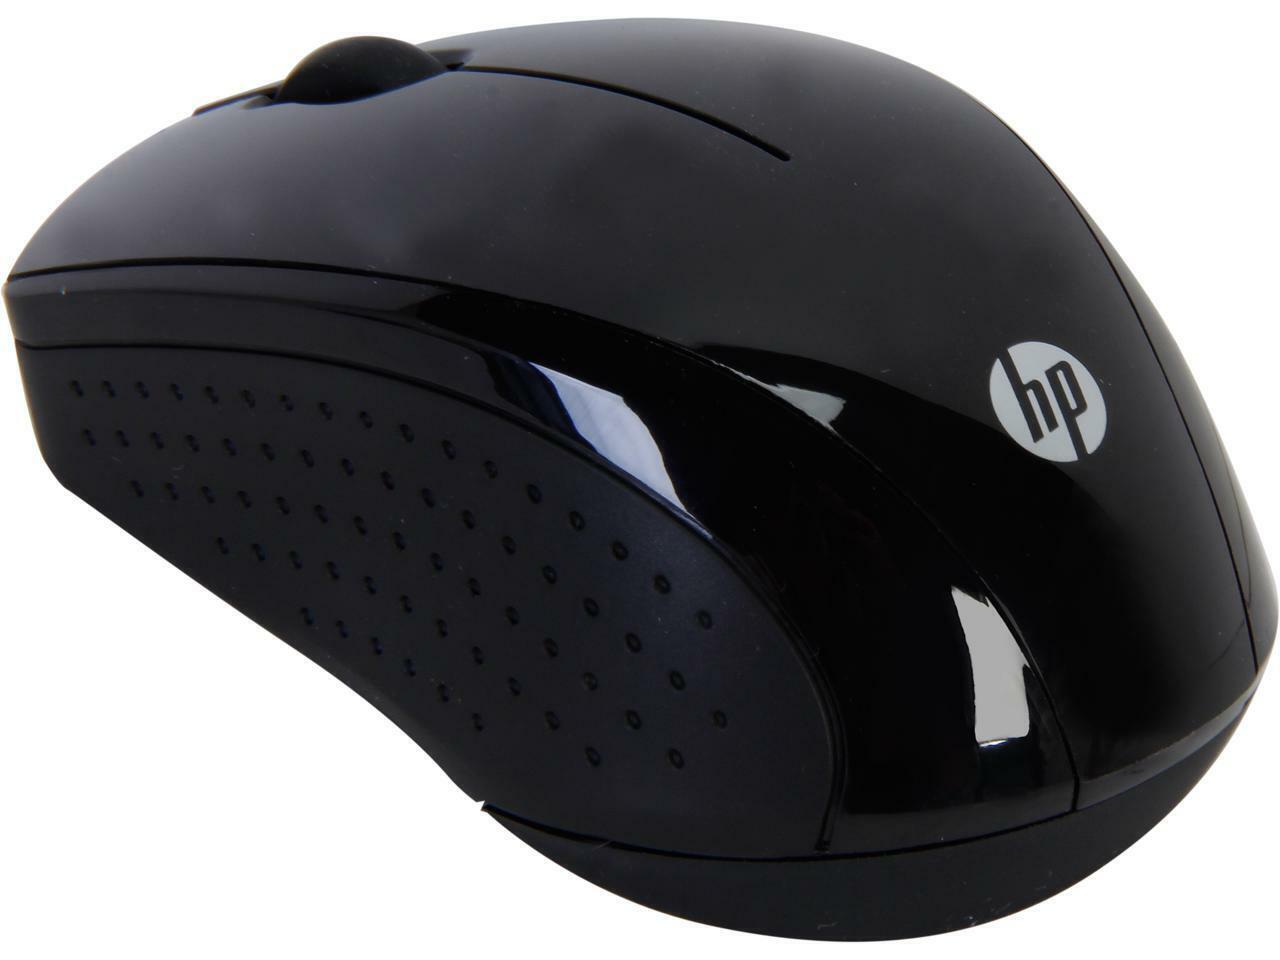 HP X3000 WIRELESS MOUSE